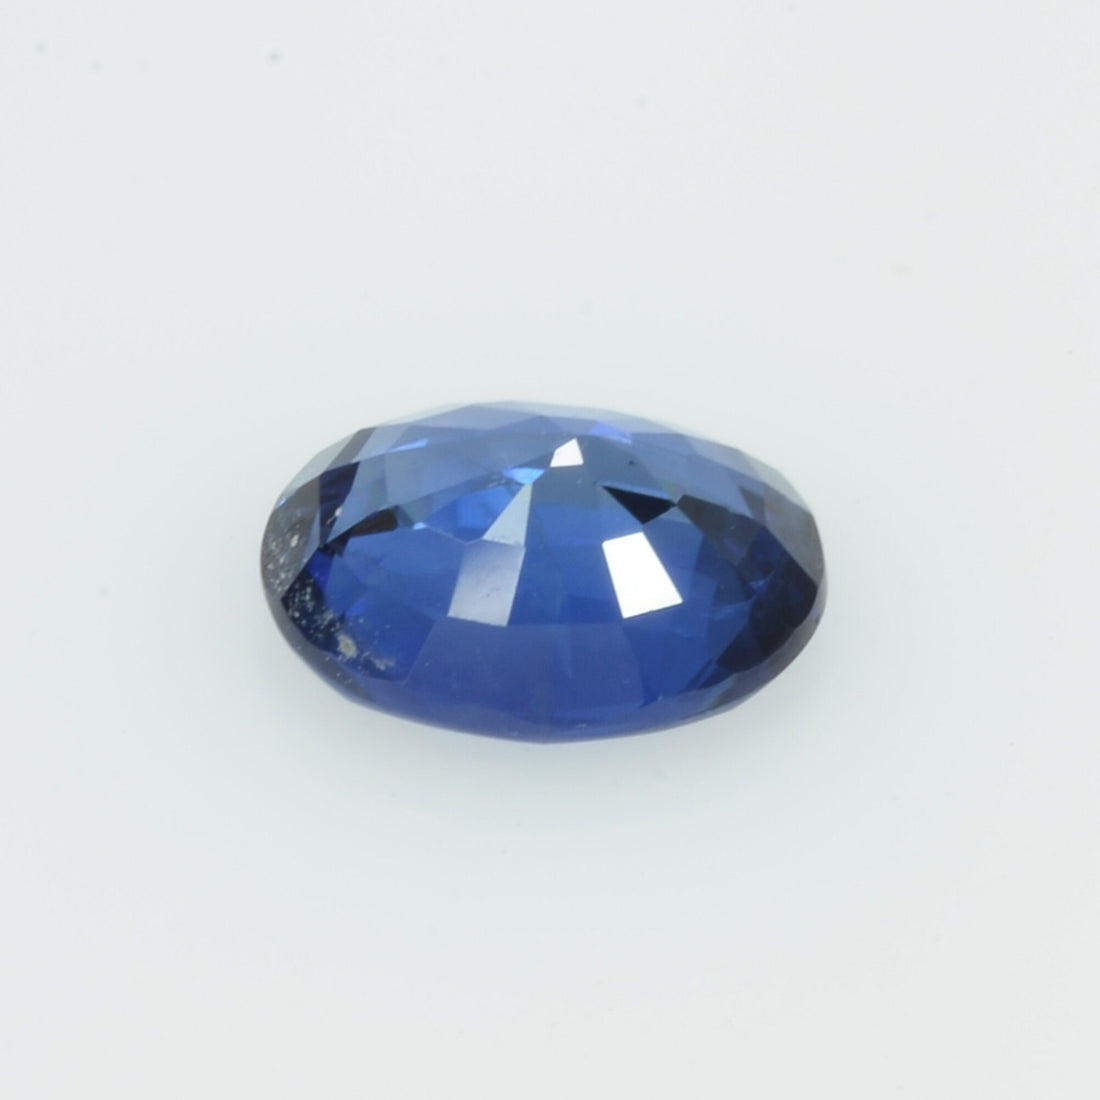 0.91 cts Natural Blue Sapphire Loose Gemstone Oval Cut